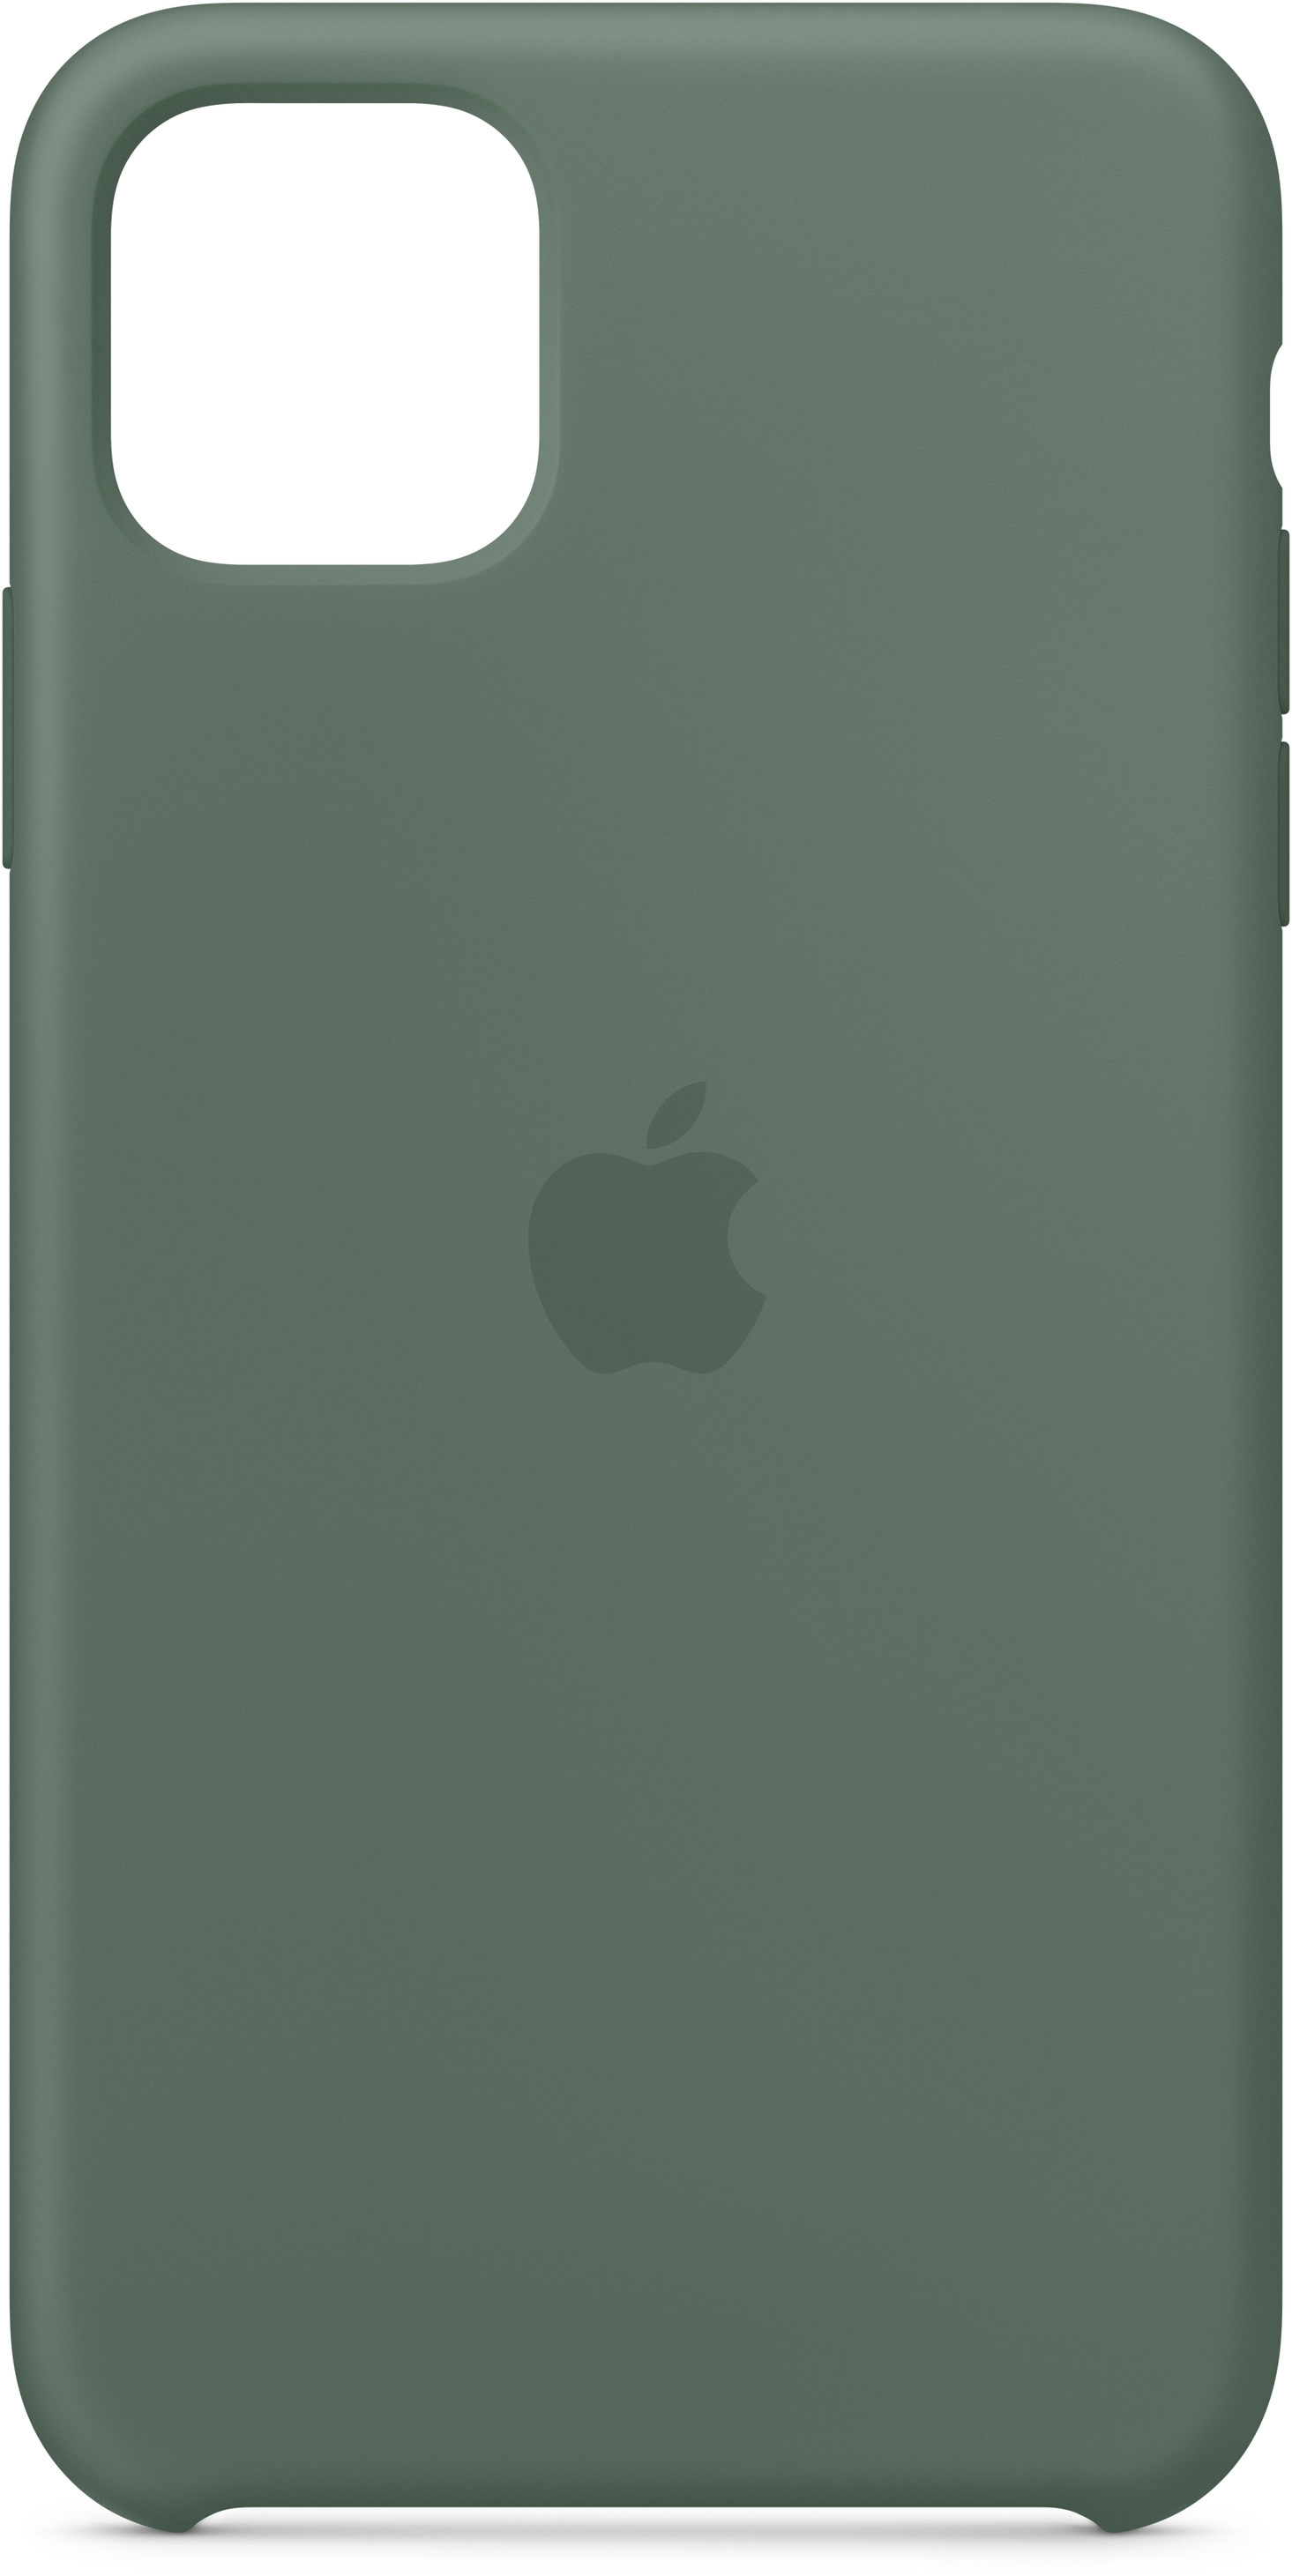 Pro Backcover, 11 iPhone APPLE Max, Silicone Piniengrün Apple, Case,